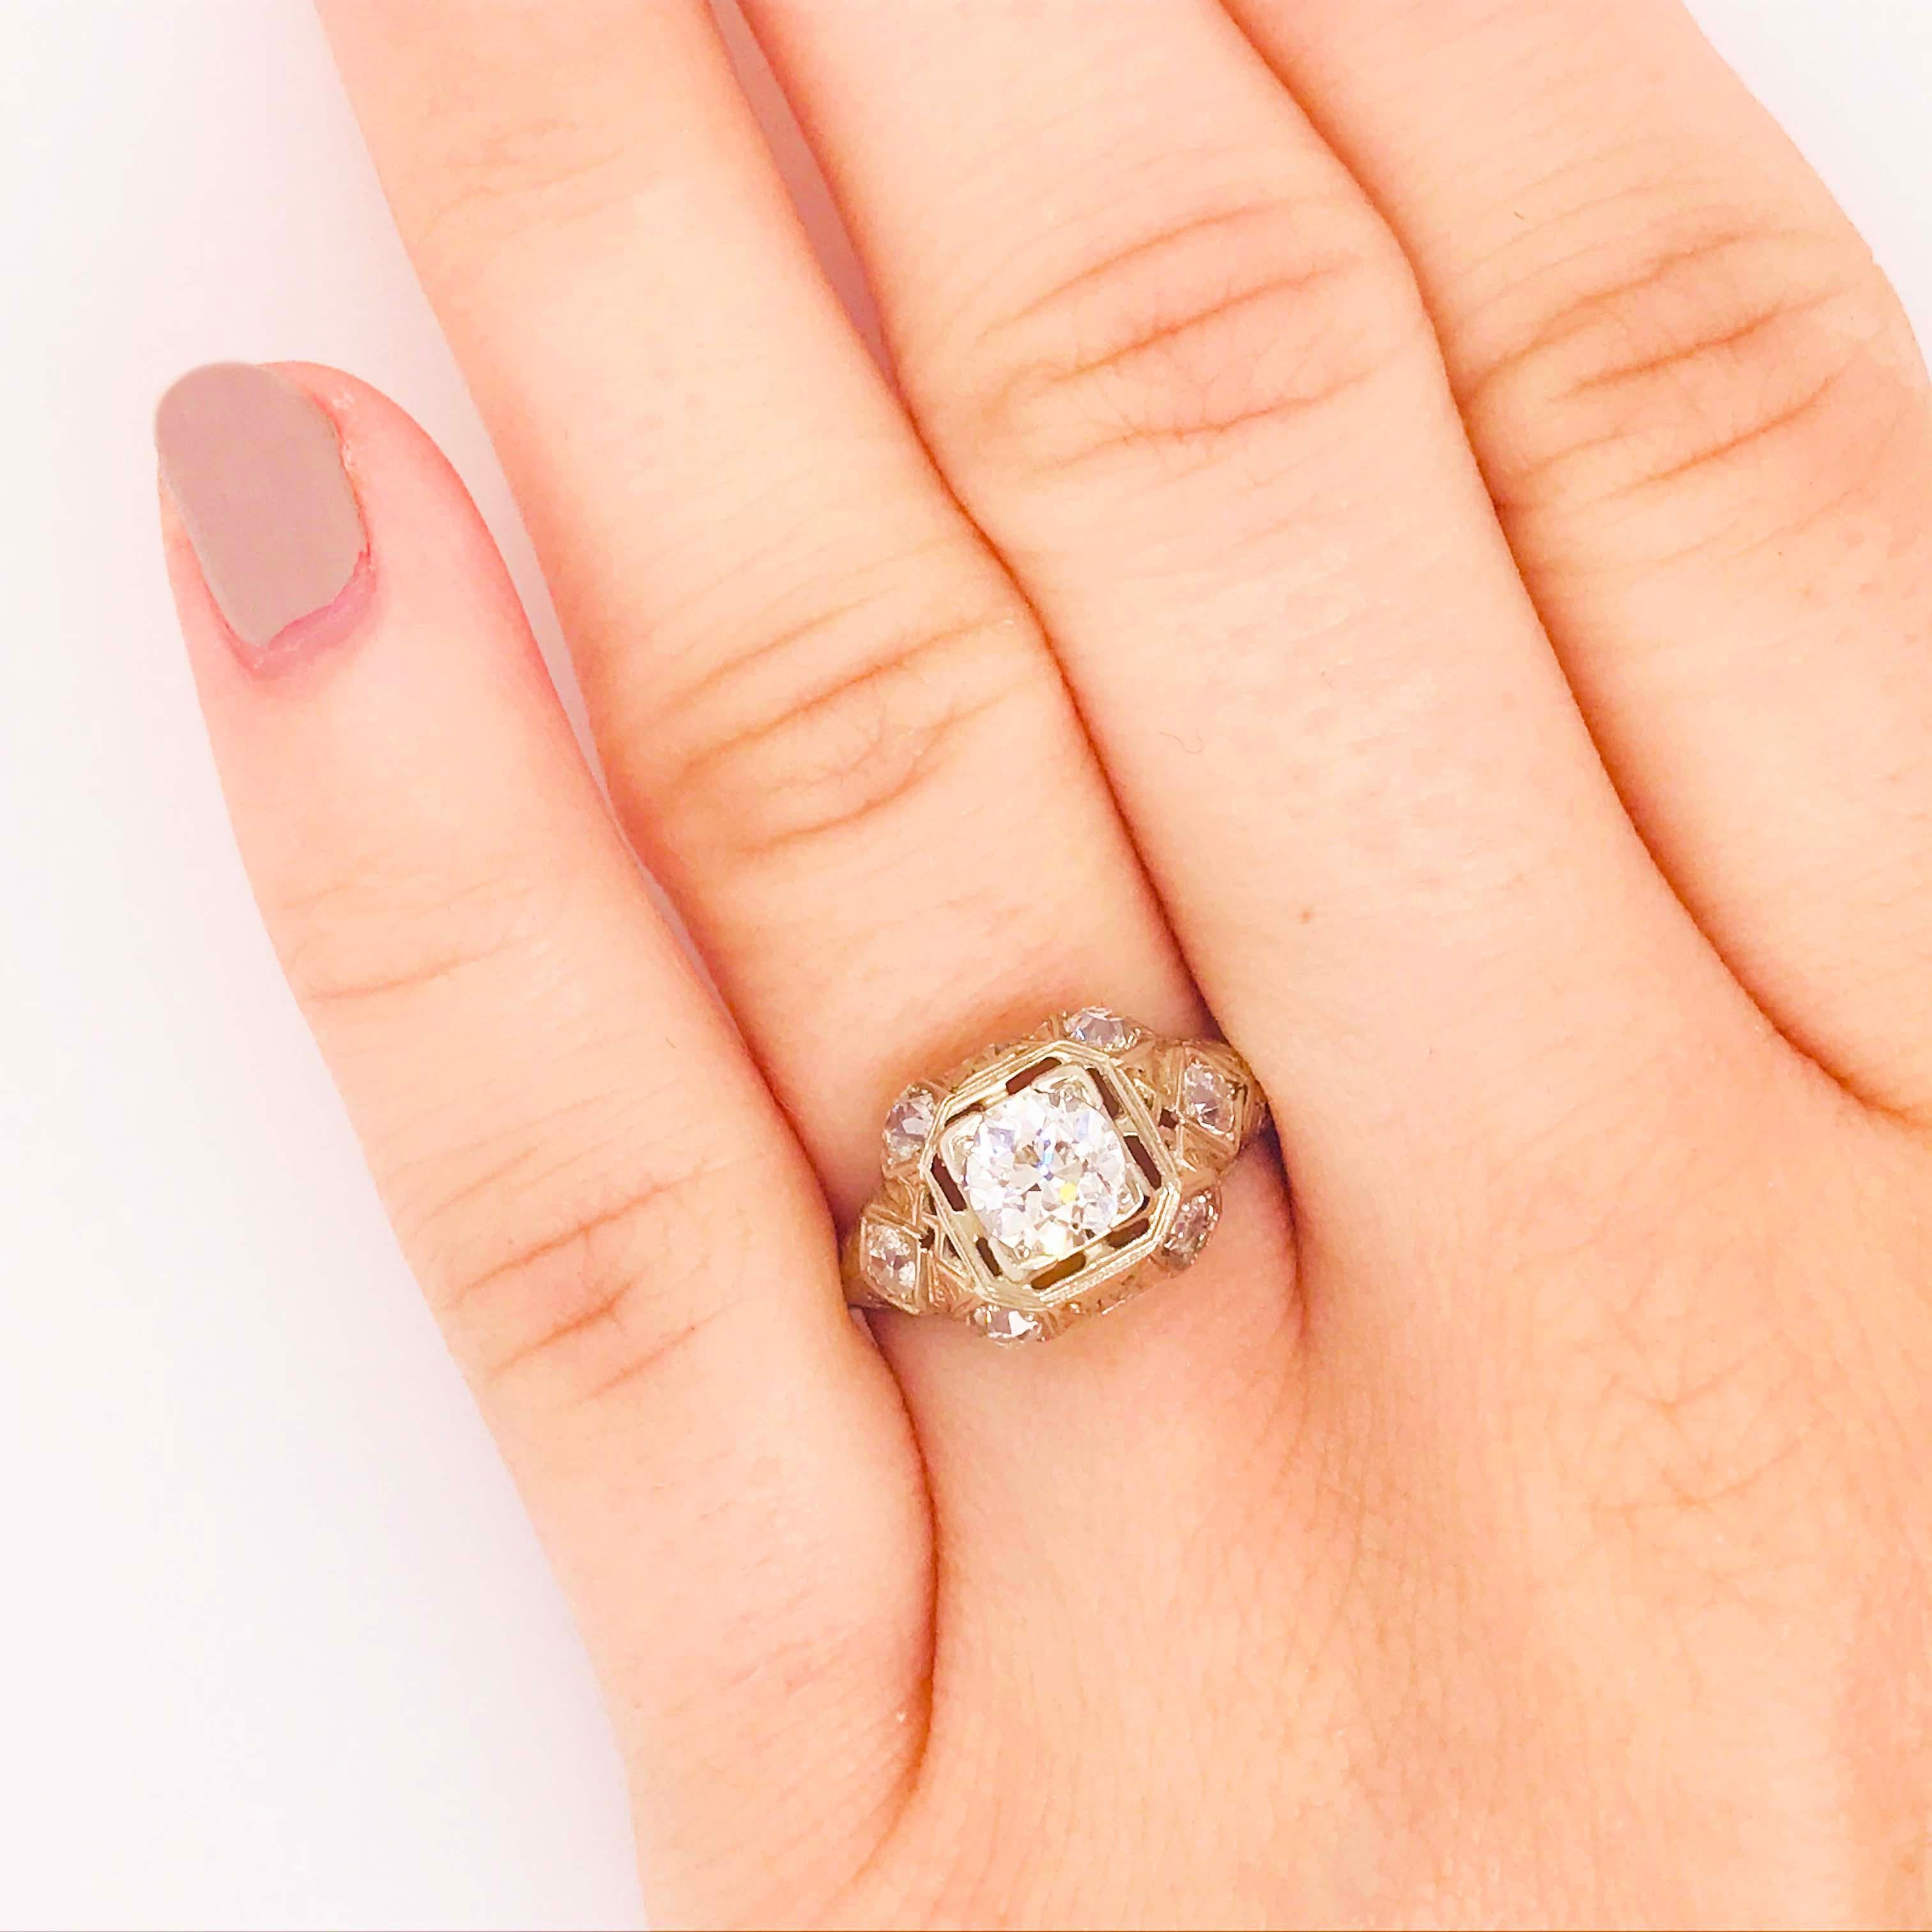 This original CIRCA 1925 Art Deco Diamond Engagement Ring in Platinum is amazing! With all the original diamonds and platinum, this estate ring is in great condition! 
Center in the center is the original, natural Old European cut diamond that is